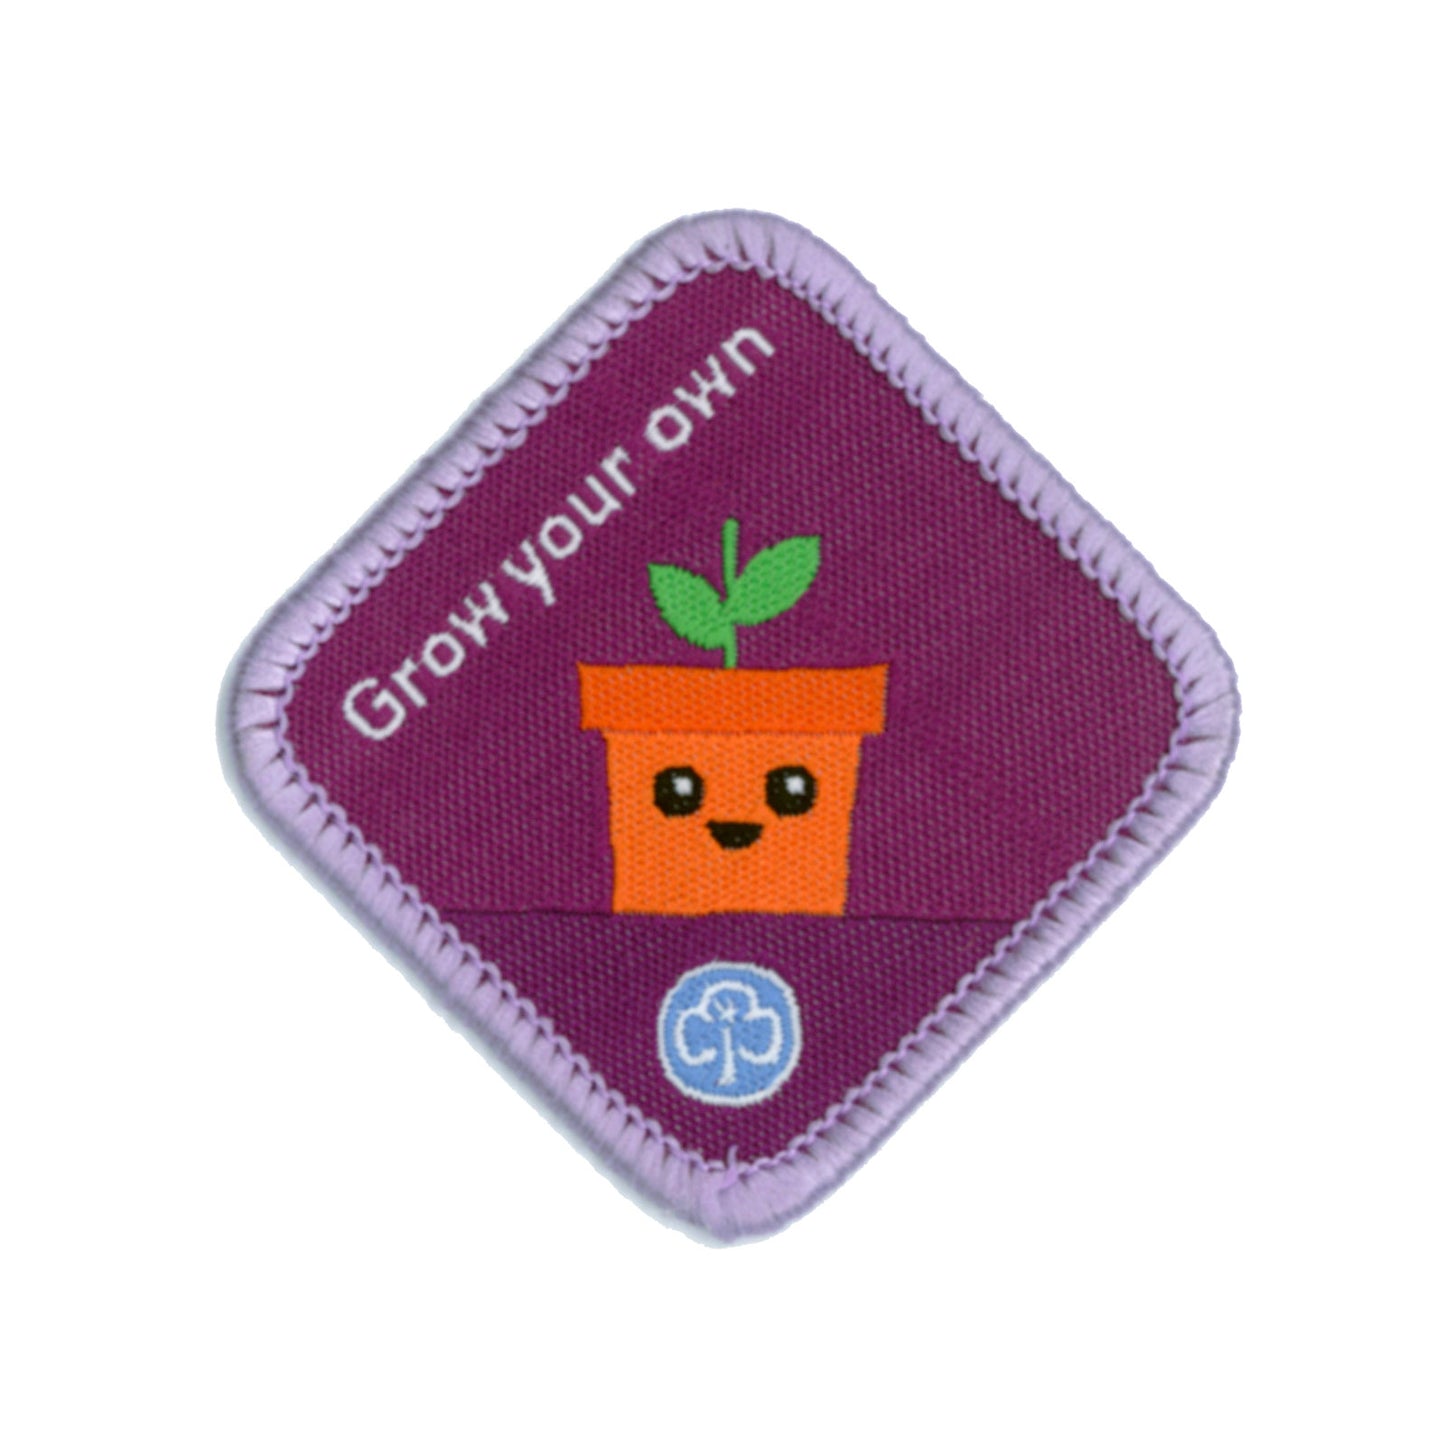 Brownies Grow Your Own Woven Badge